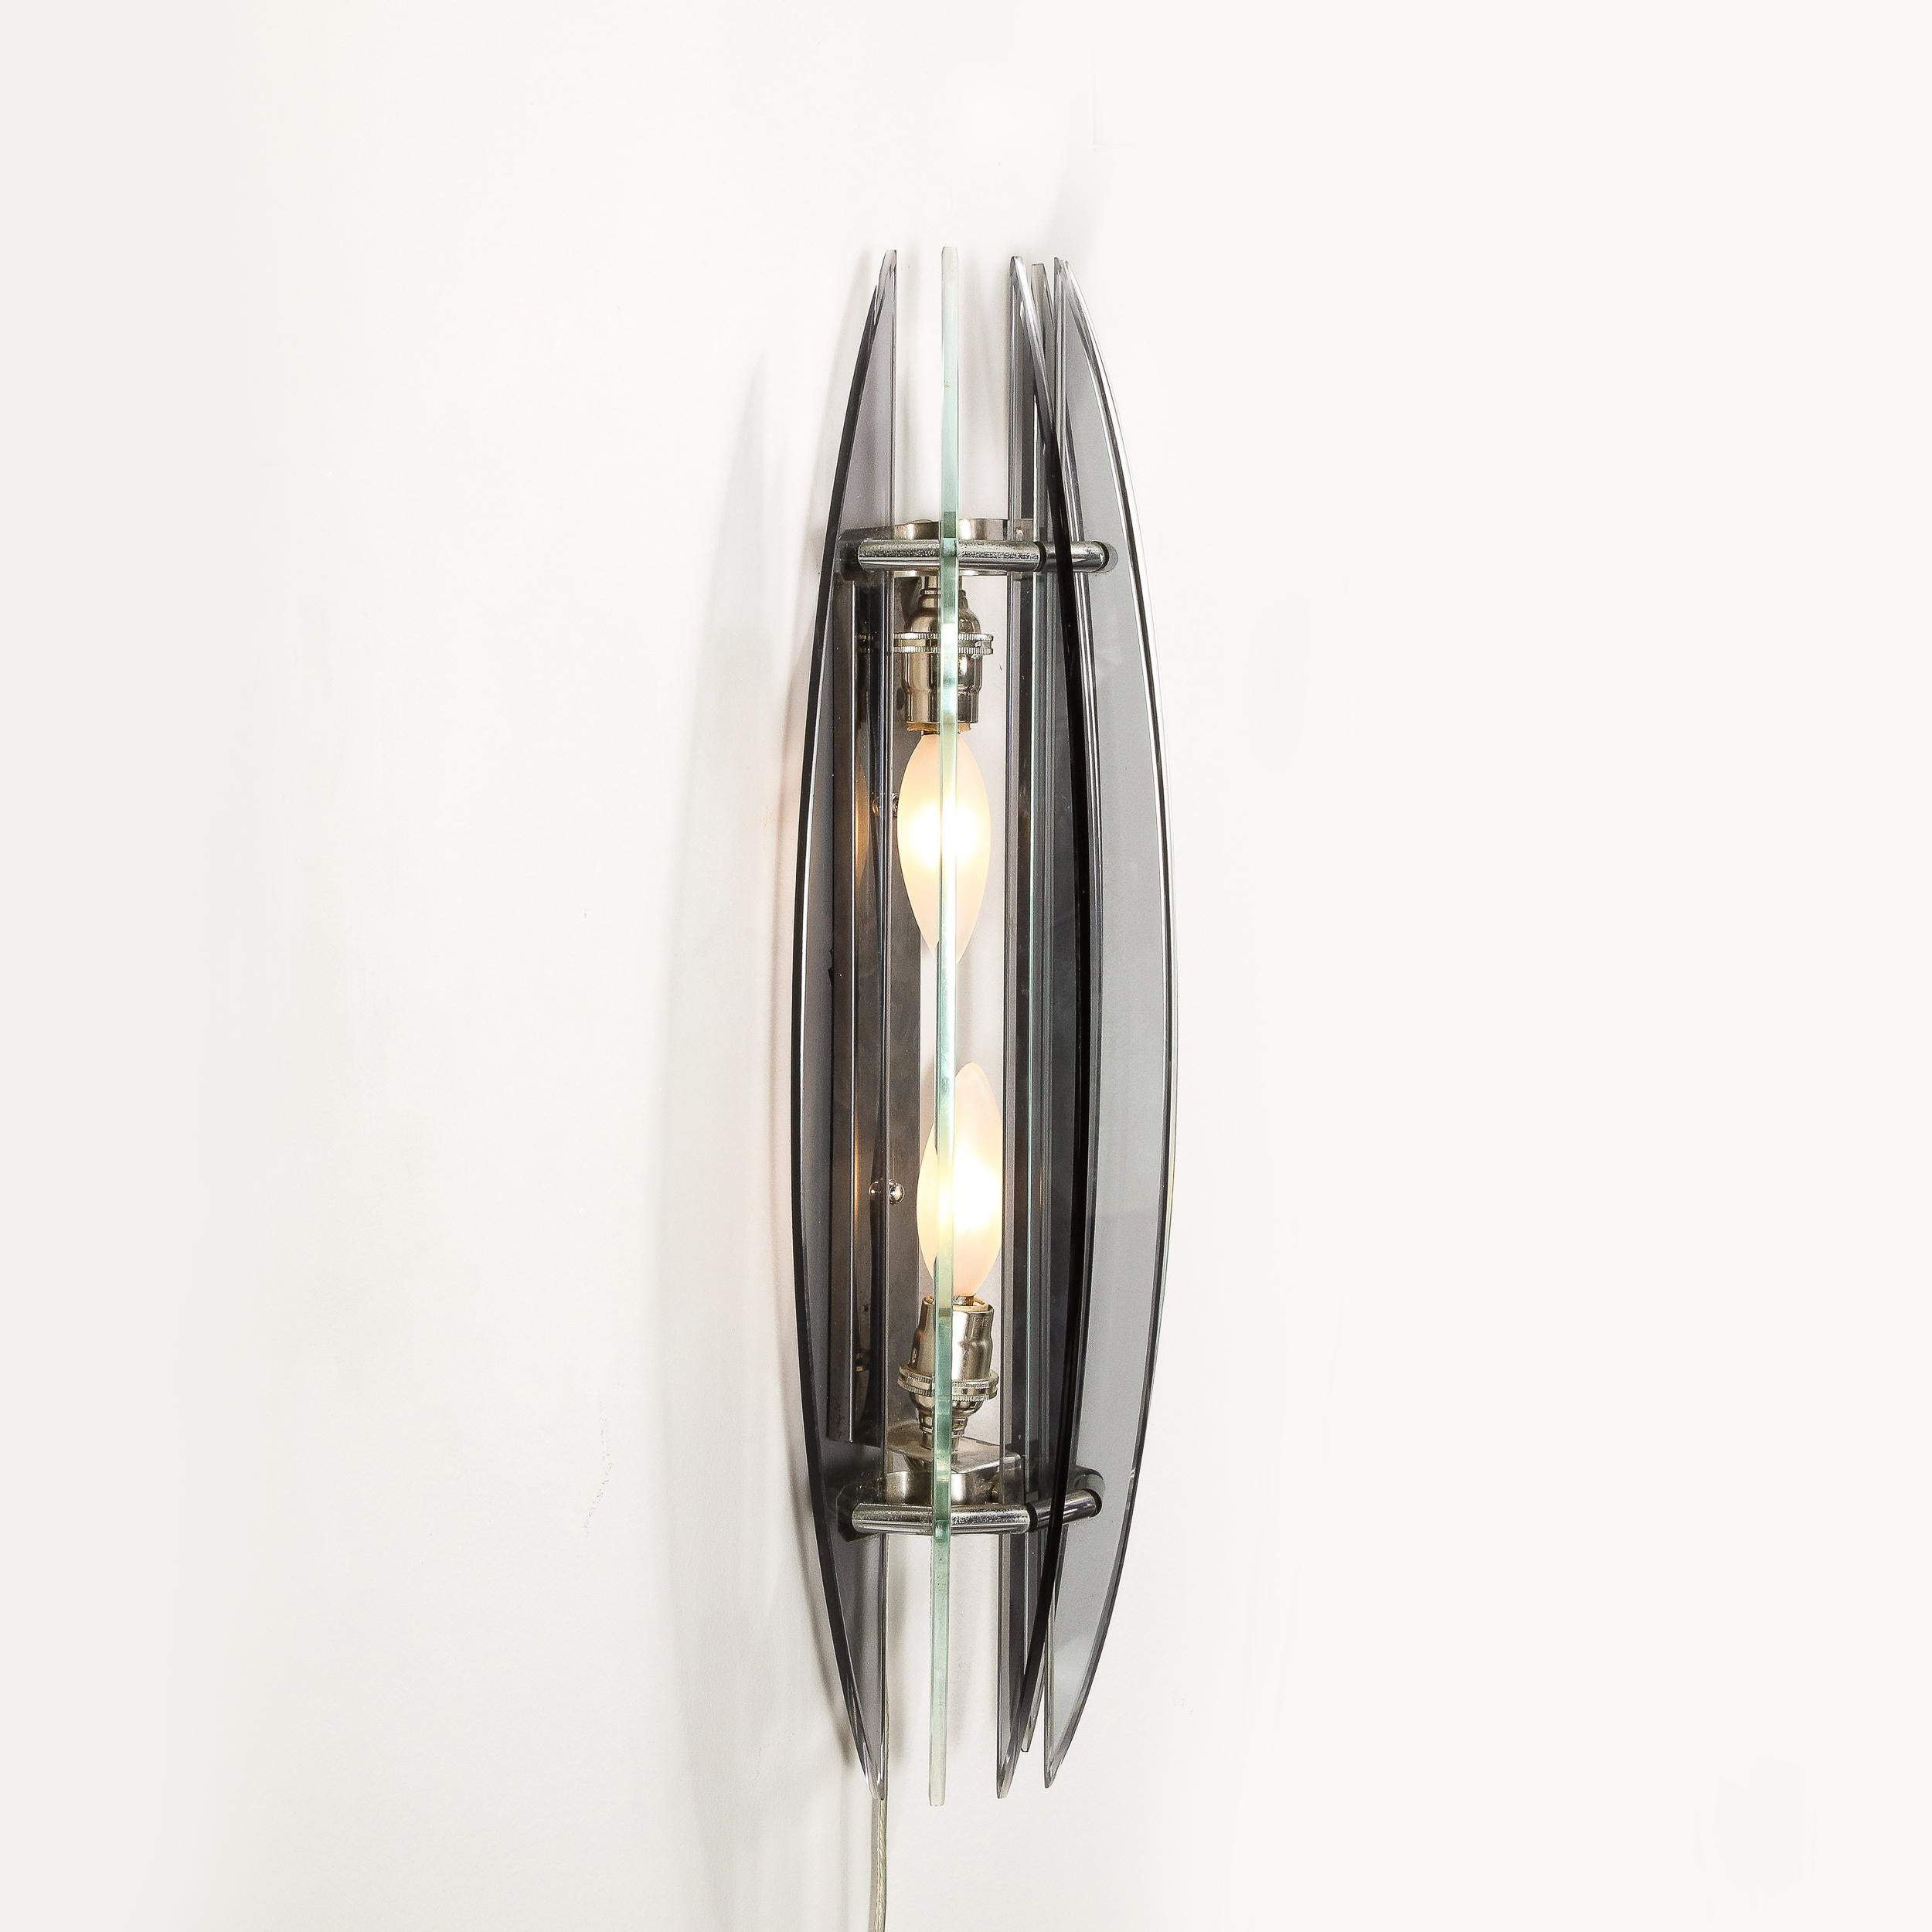 Pair of Mid-Century Modernist Curved Smoked Glass & Chrome Sconces by Veca In Excellent Condition For Sale In New York, NY